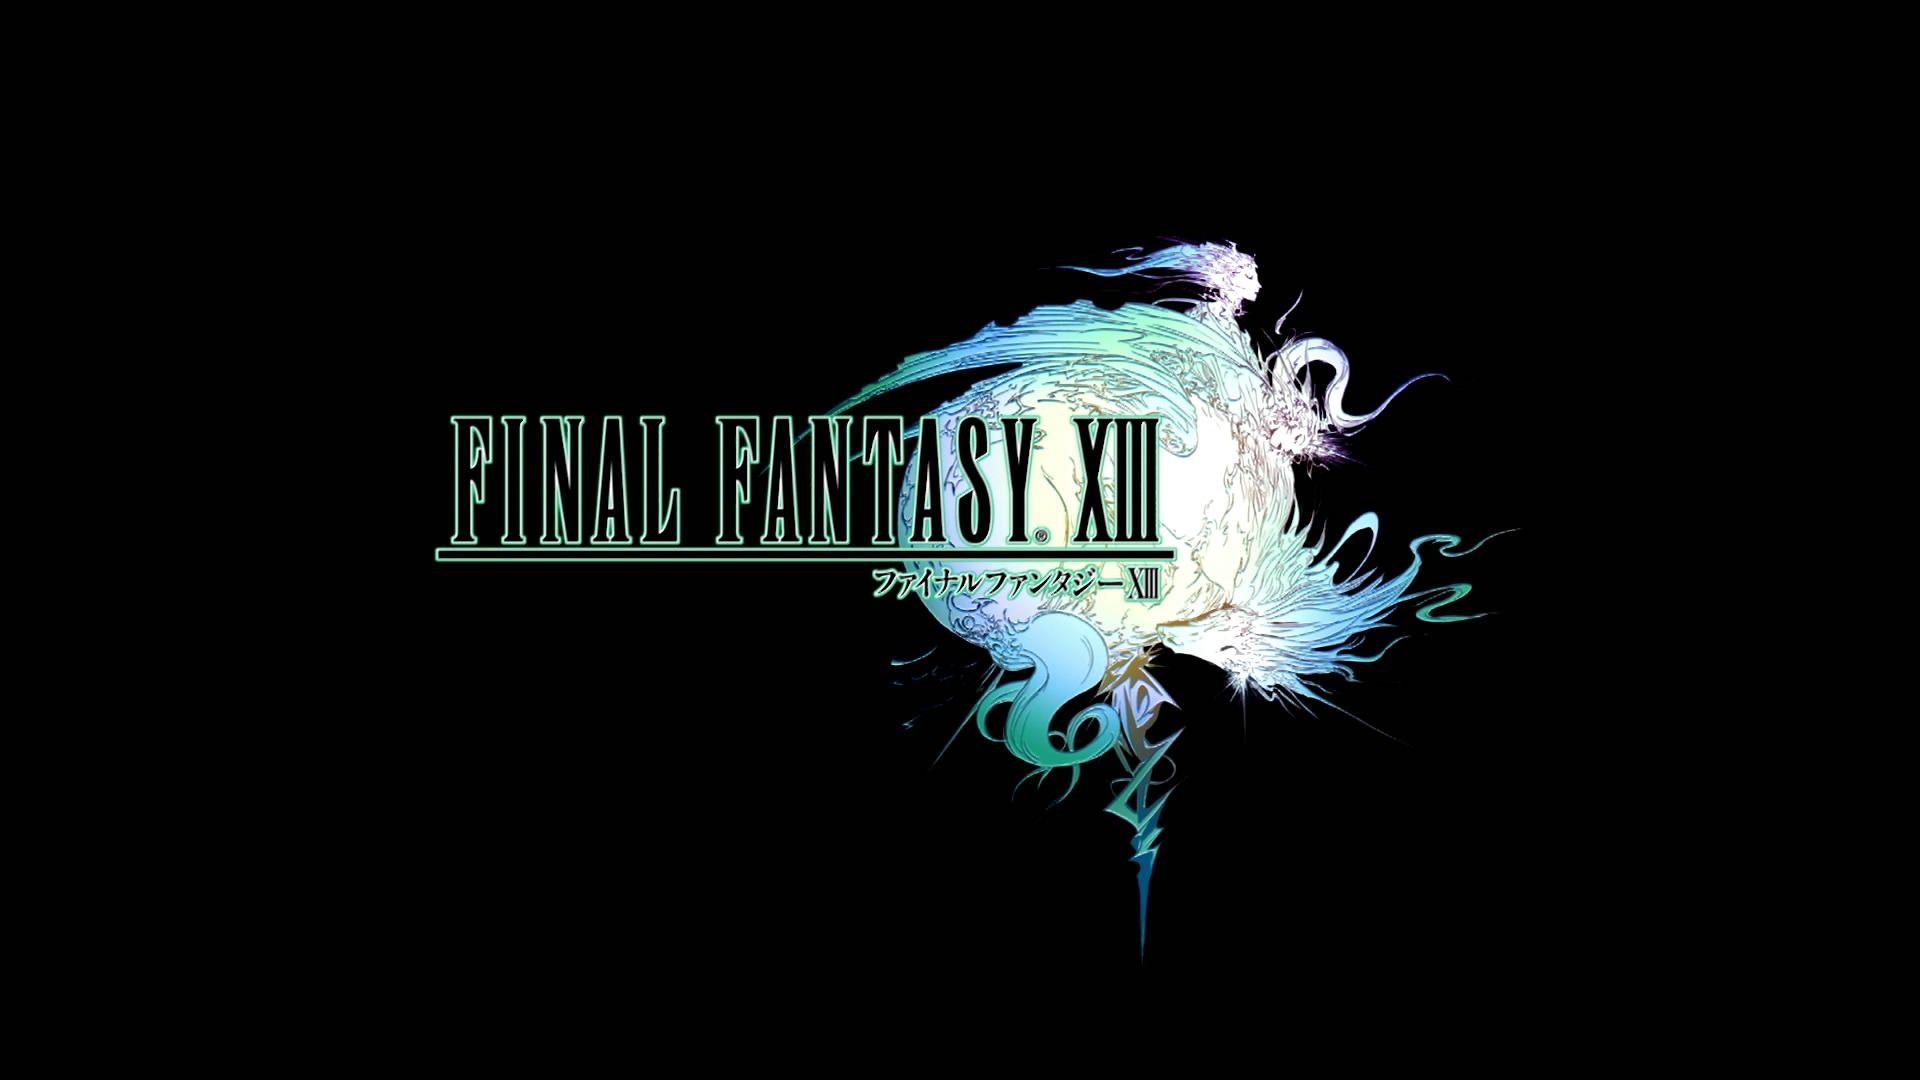 Final Fantasy 13 wide wallpapers Wallpapers